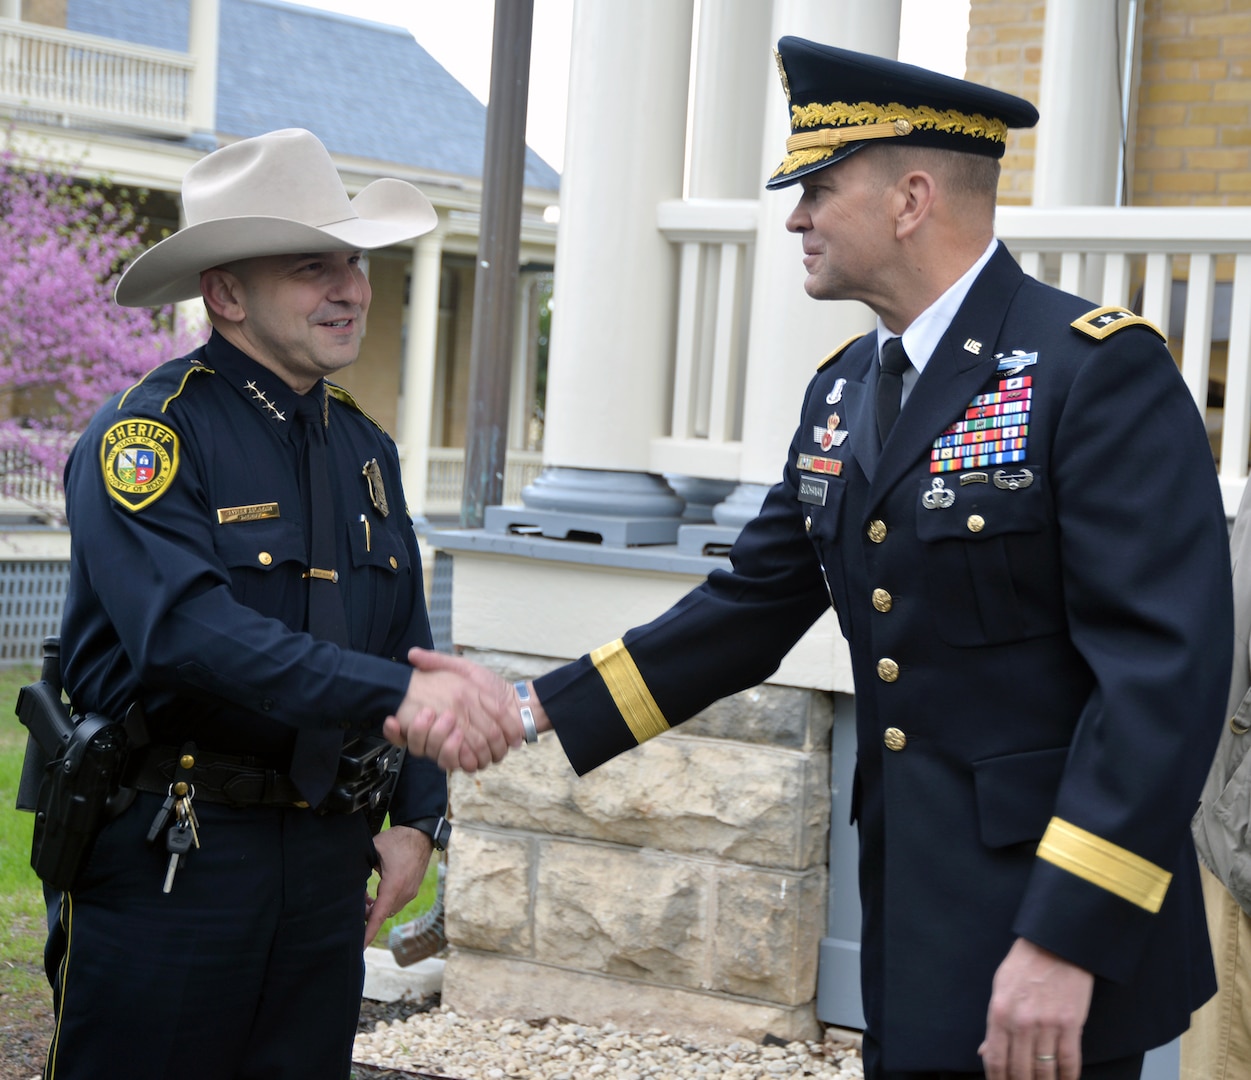 Lt. Gen. Jeffrey Buchanan (right), commanding general of U.S. Army North (Fifth Army), at Joint Base San Antonio-Fort Sam Houston, greets Bexar County Sheriff Javier Salazar (left) at the Foulois House after the ceremony celebrating the first military flight by Lt. Benjamin Foulois March 2.